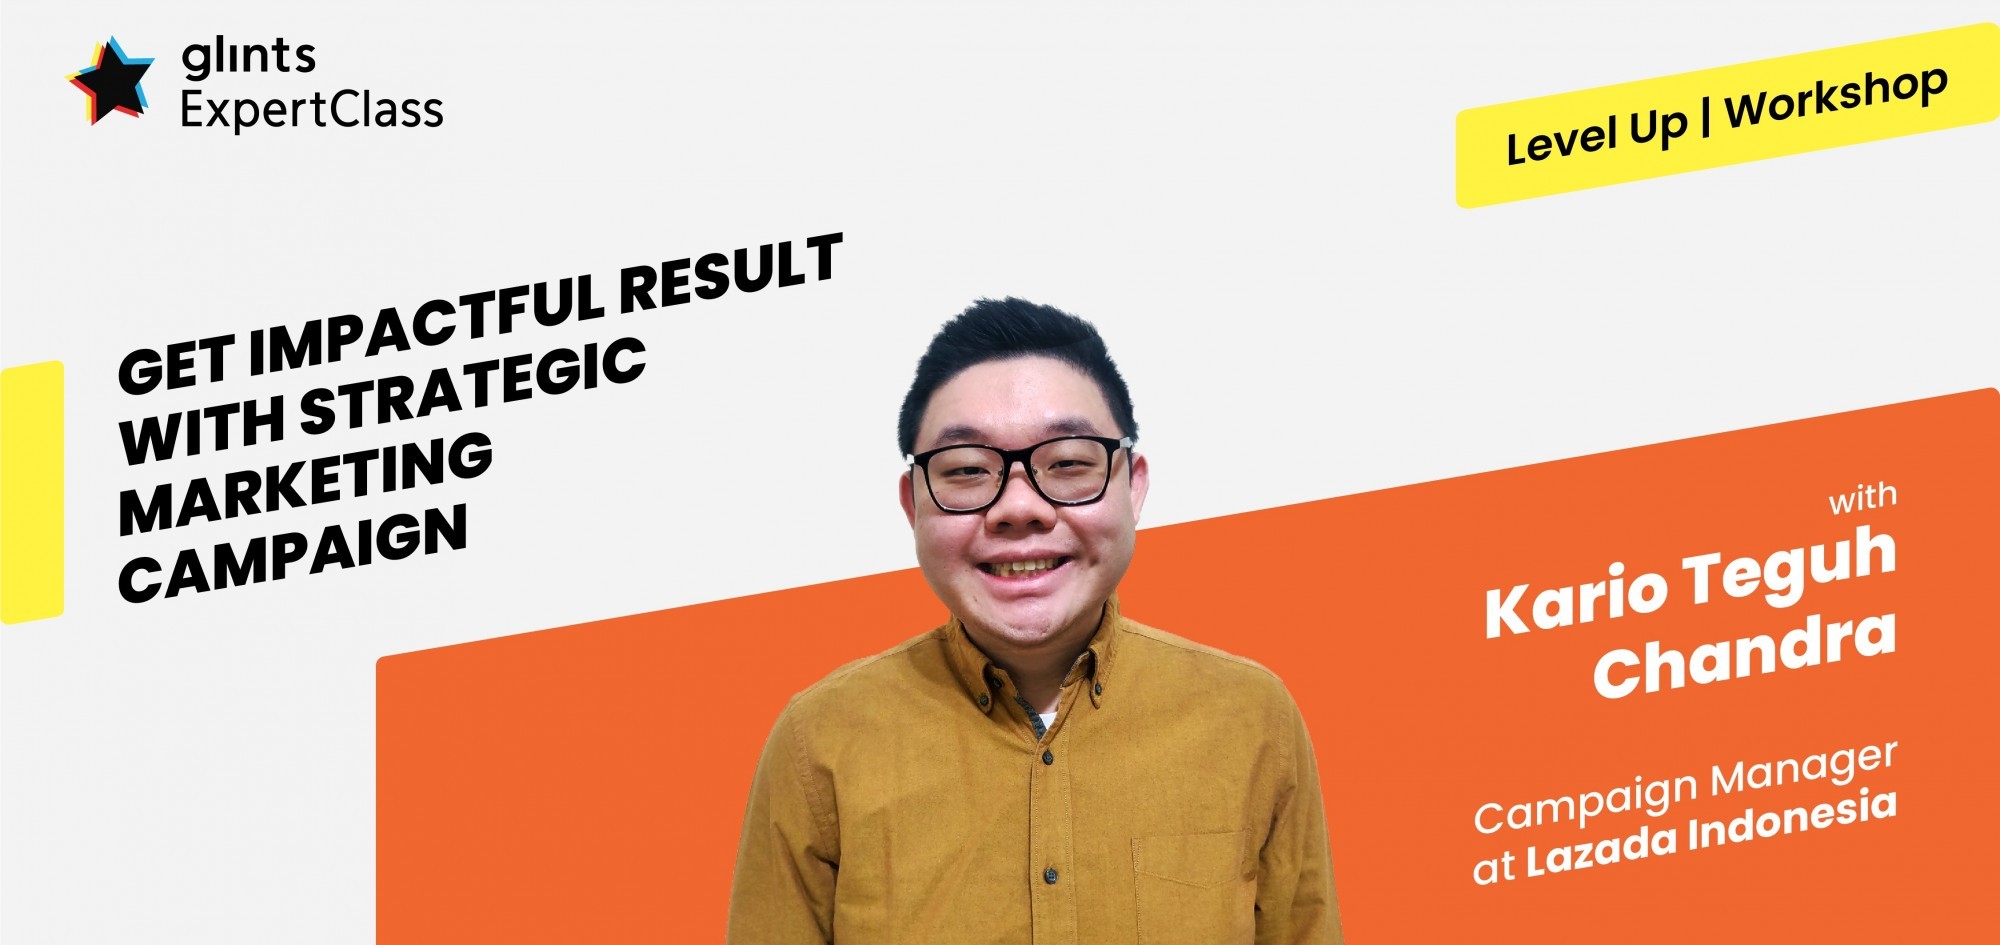 [Online Glints ExpertClass] Get Impactful Result with Strategic Marketing Campaign